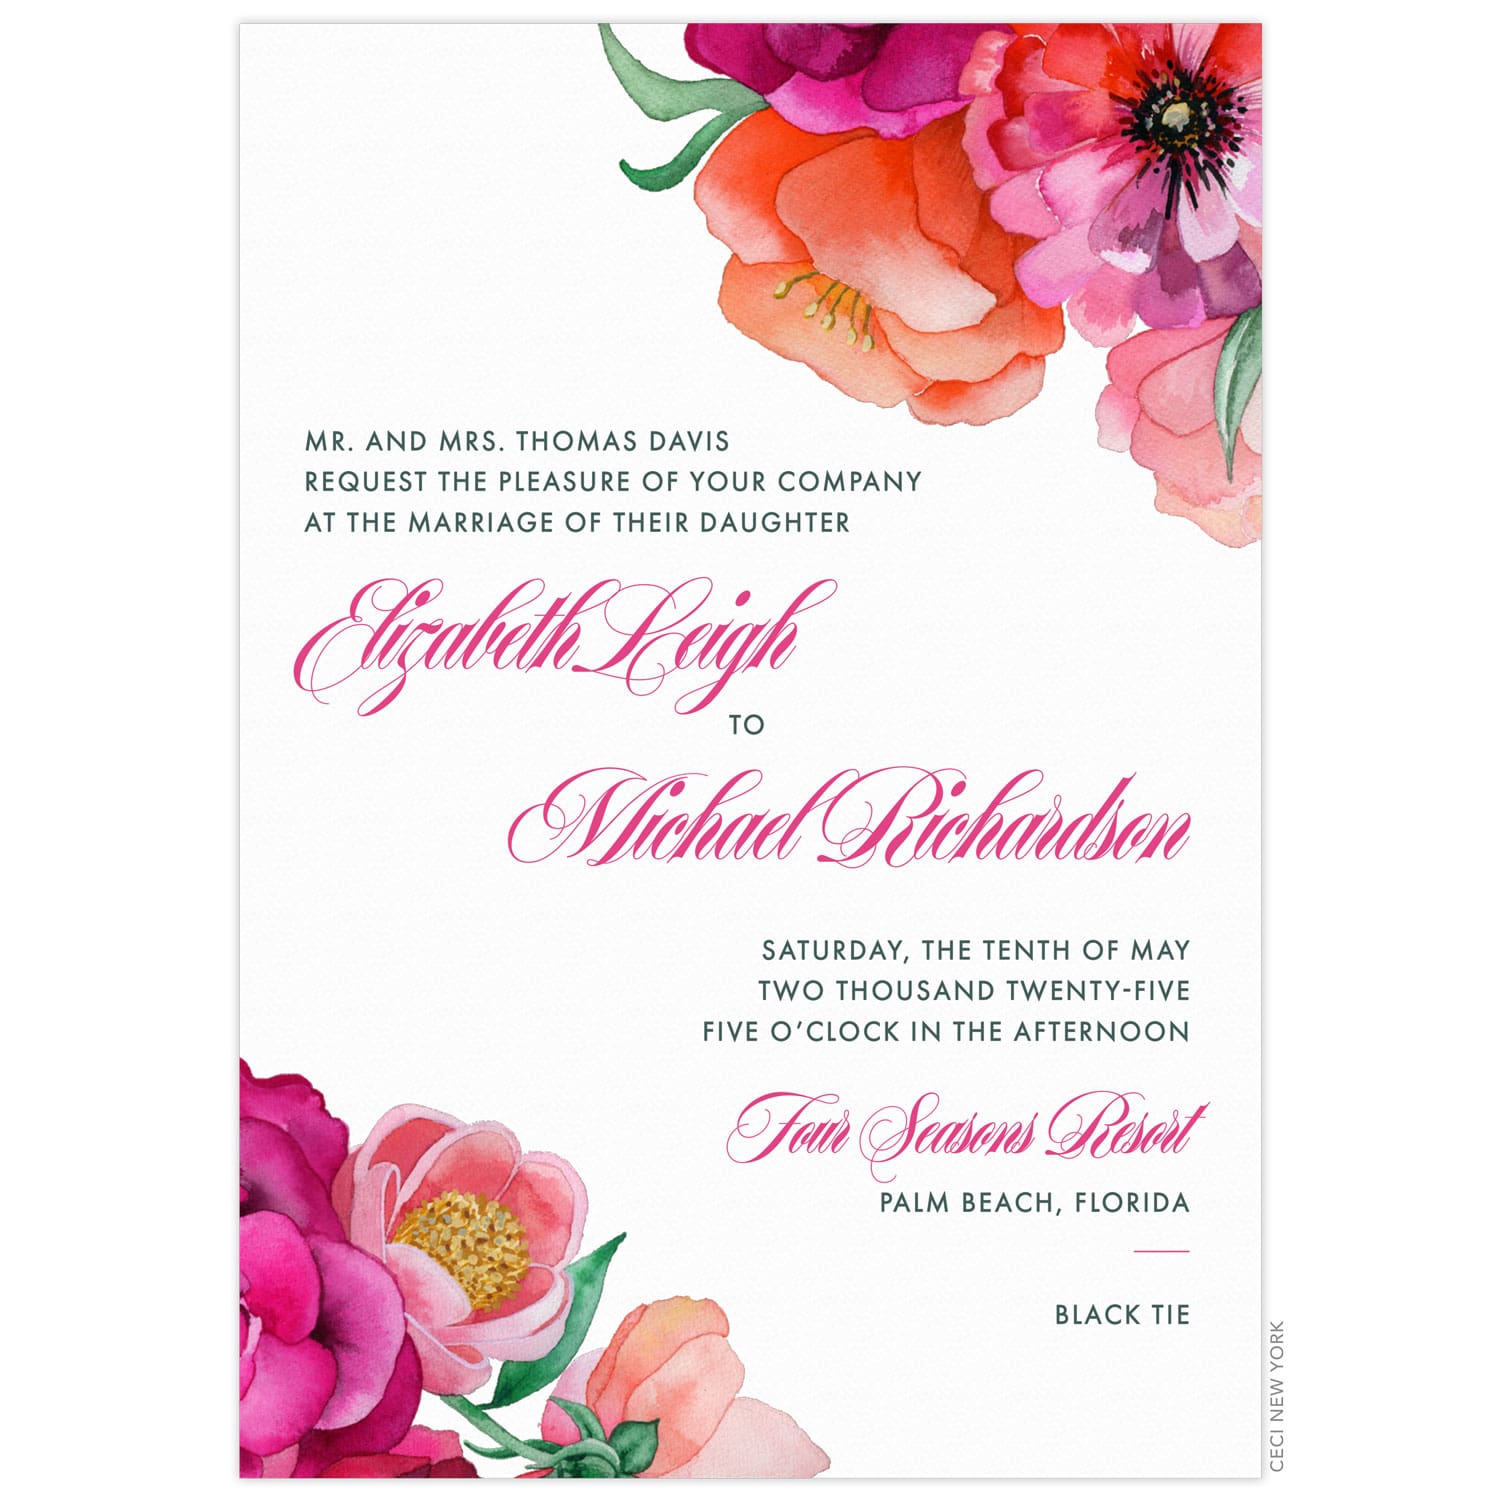 Bright pink and orange watercolor flowers in the top right and bottom left corner. Grey block text and pink script text on a white invitation card.